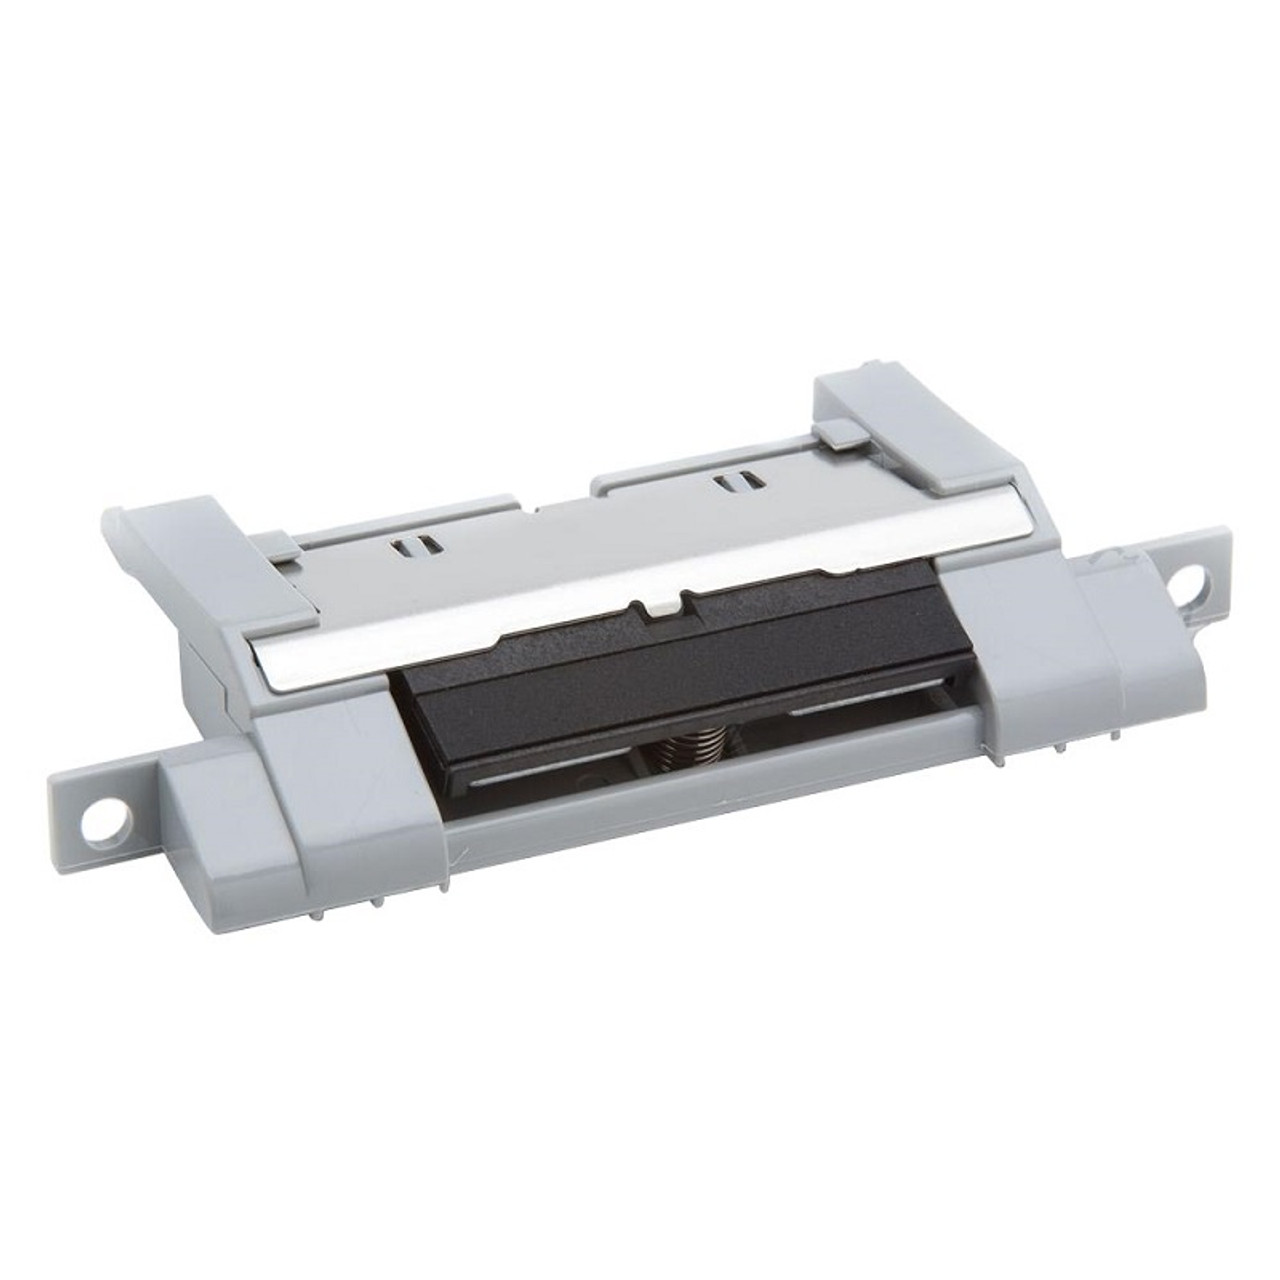 RM1-0739 - HP Separation Pad Tray 2 for LJ 3500 / 3550 / 3700 Series